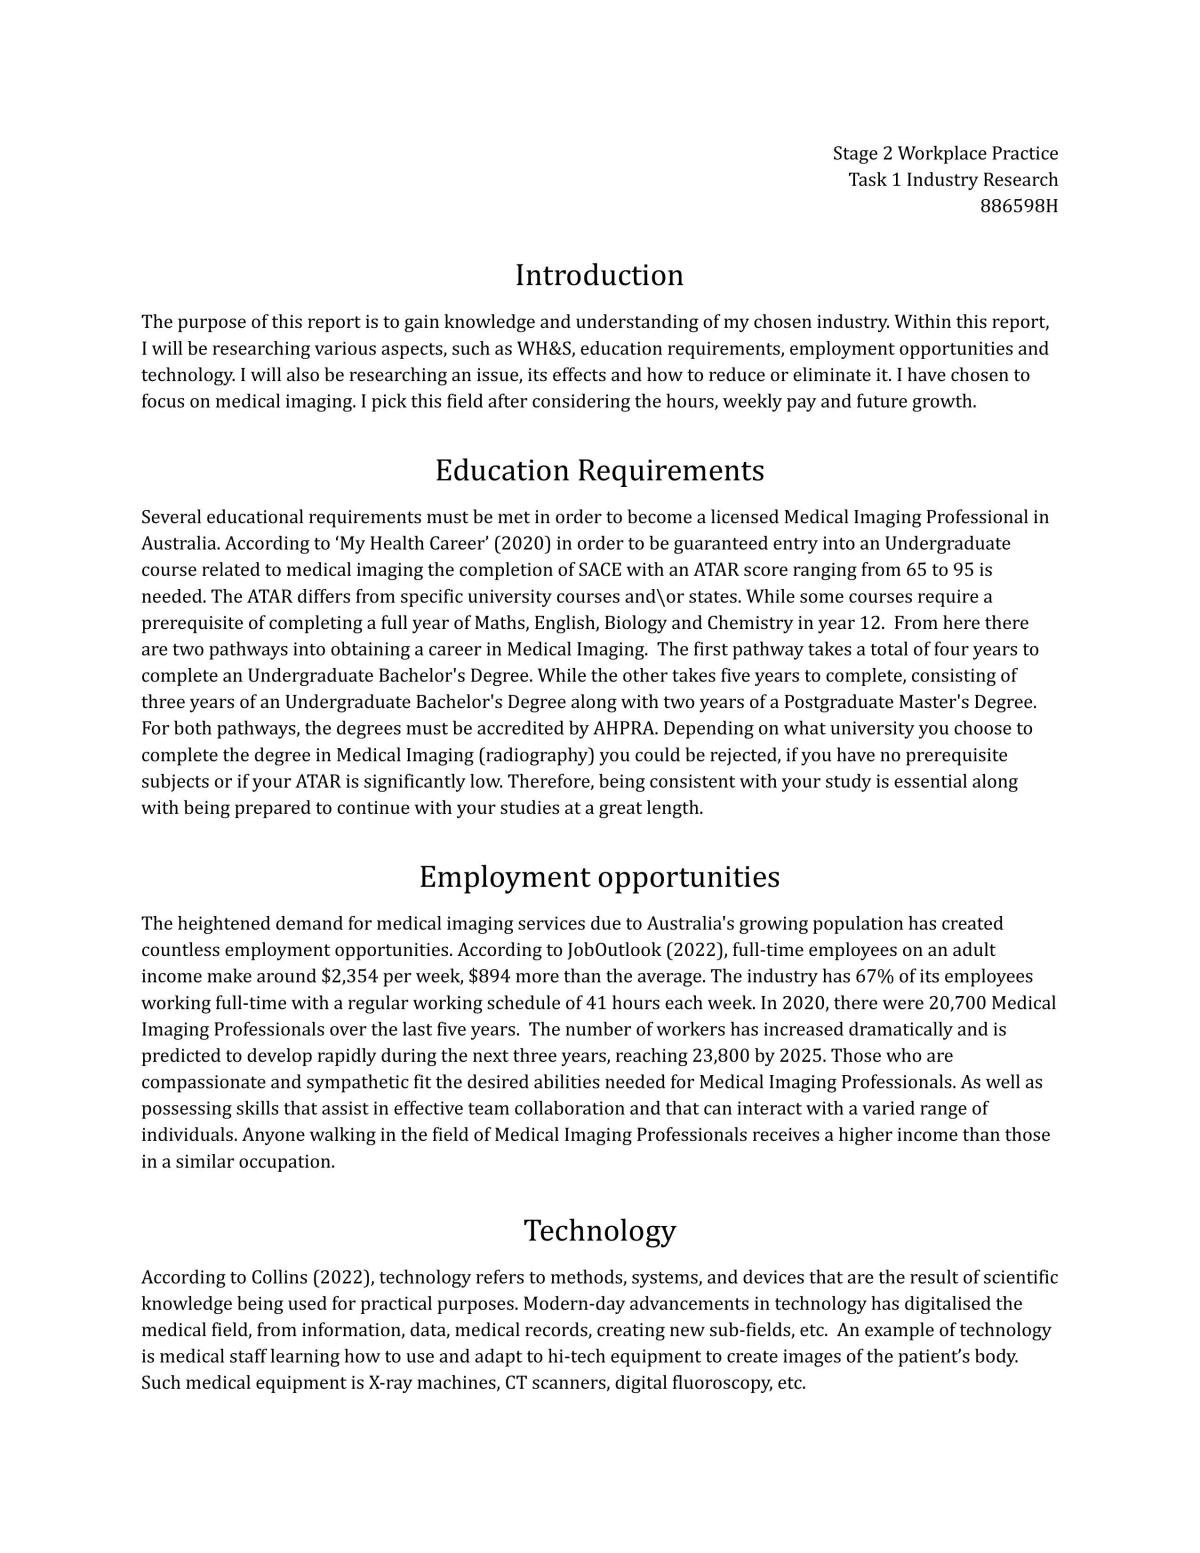 Task 1 Industry Research  - Page 1